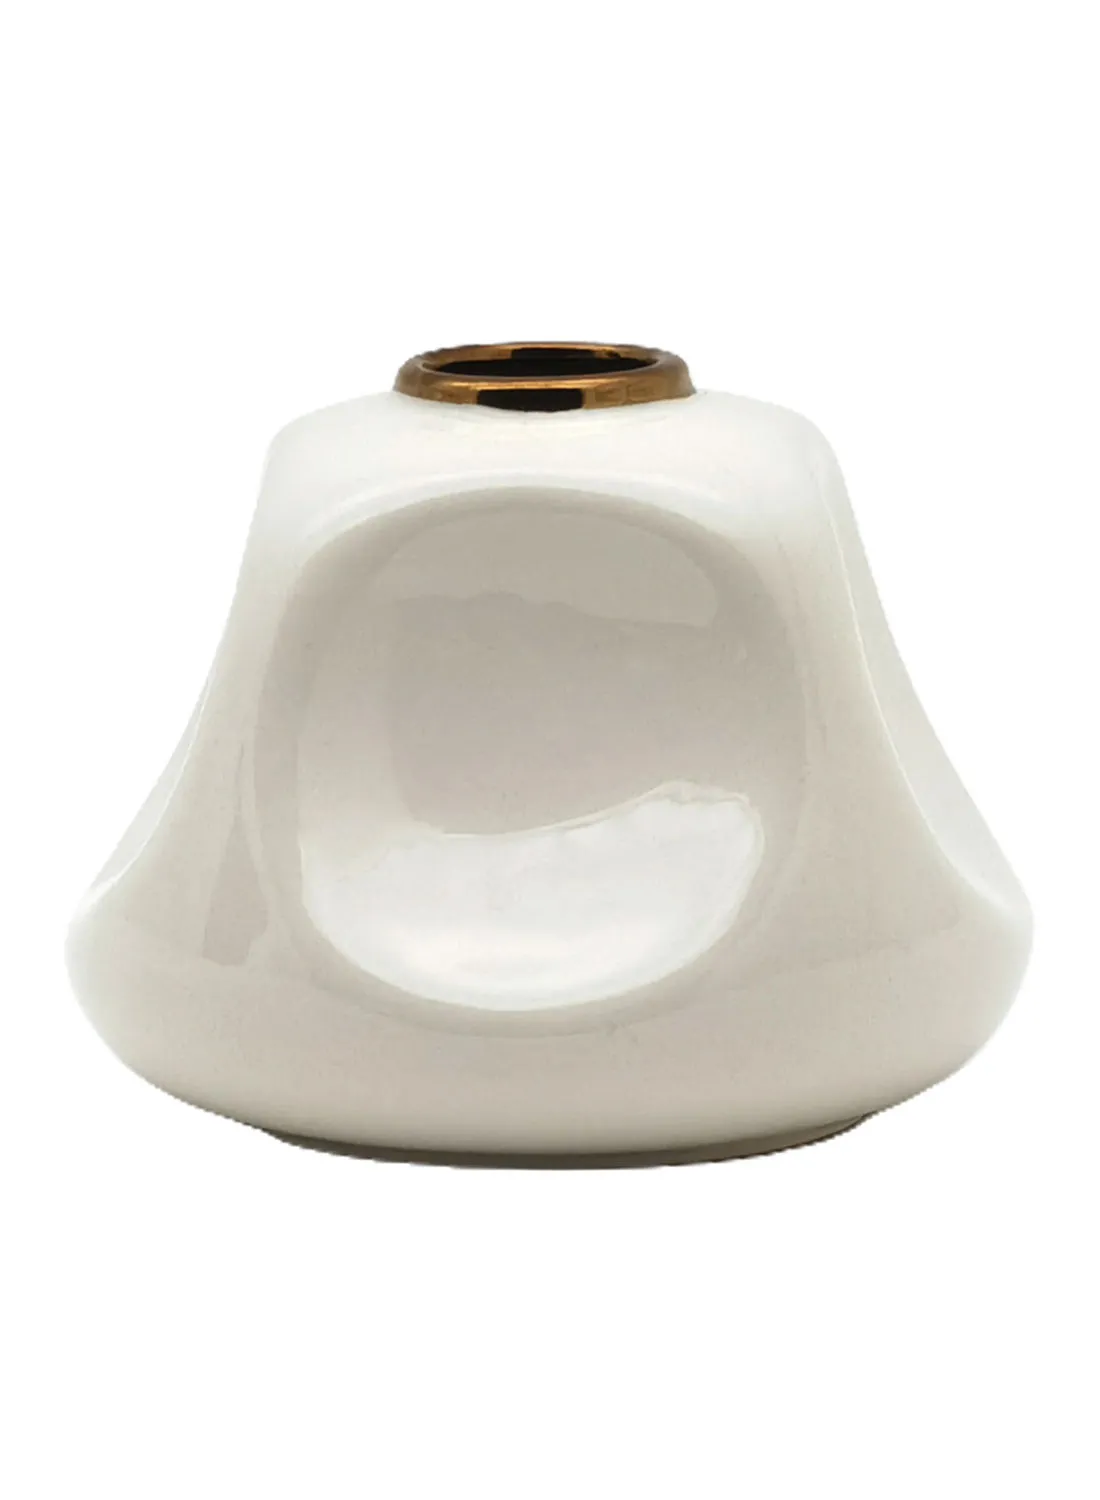 ebb & flow Glossy Glaze With Curved Shape Ceramic Vase Unique Quality Material For The Perfect Stylish Home N13-042 Cream 14.5 x 12cm